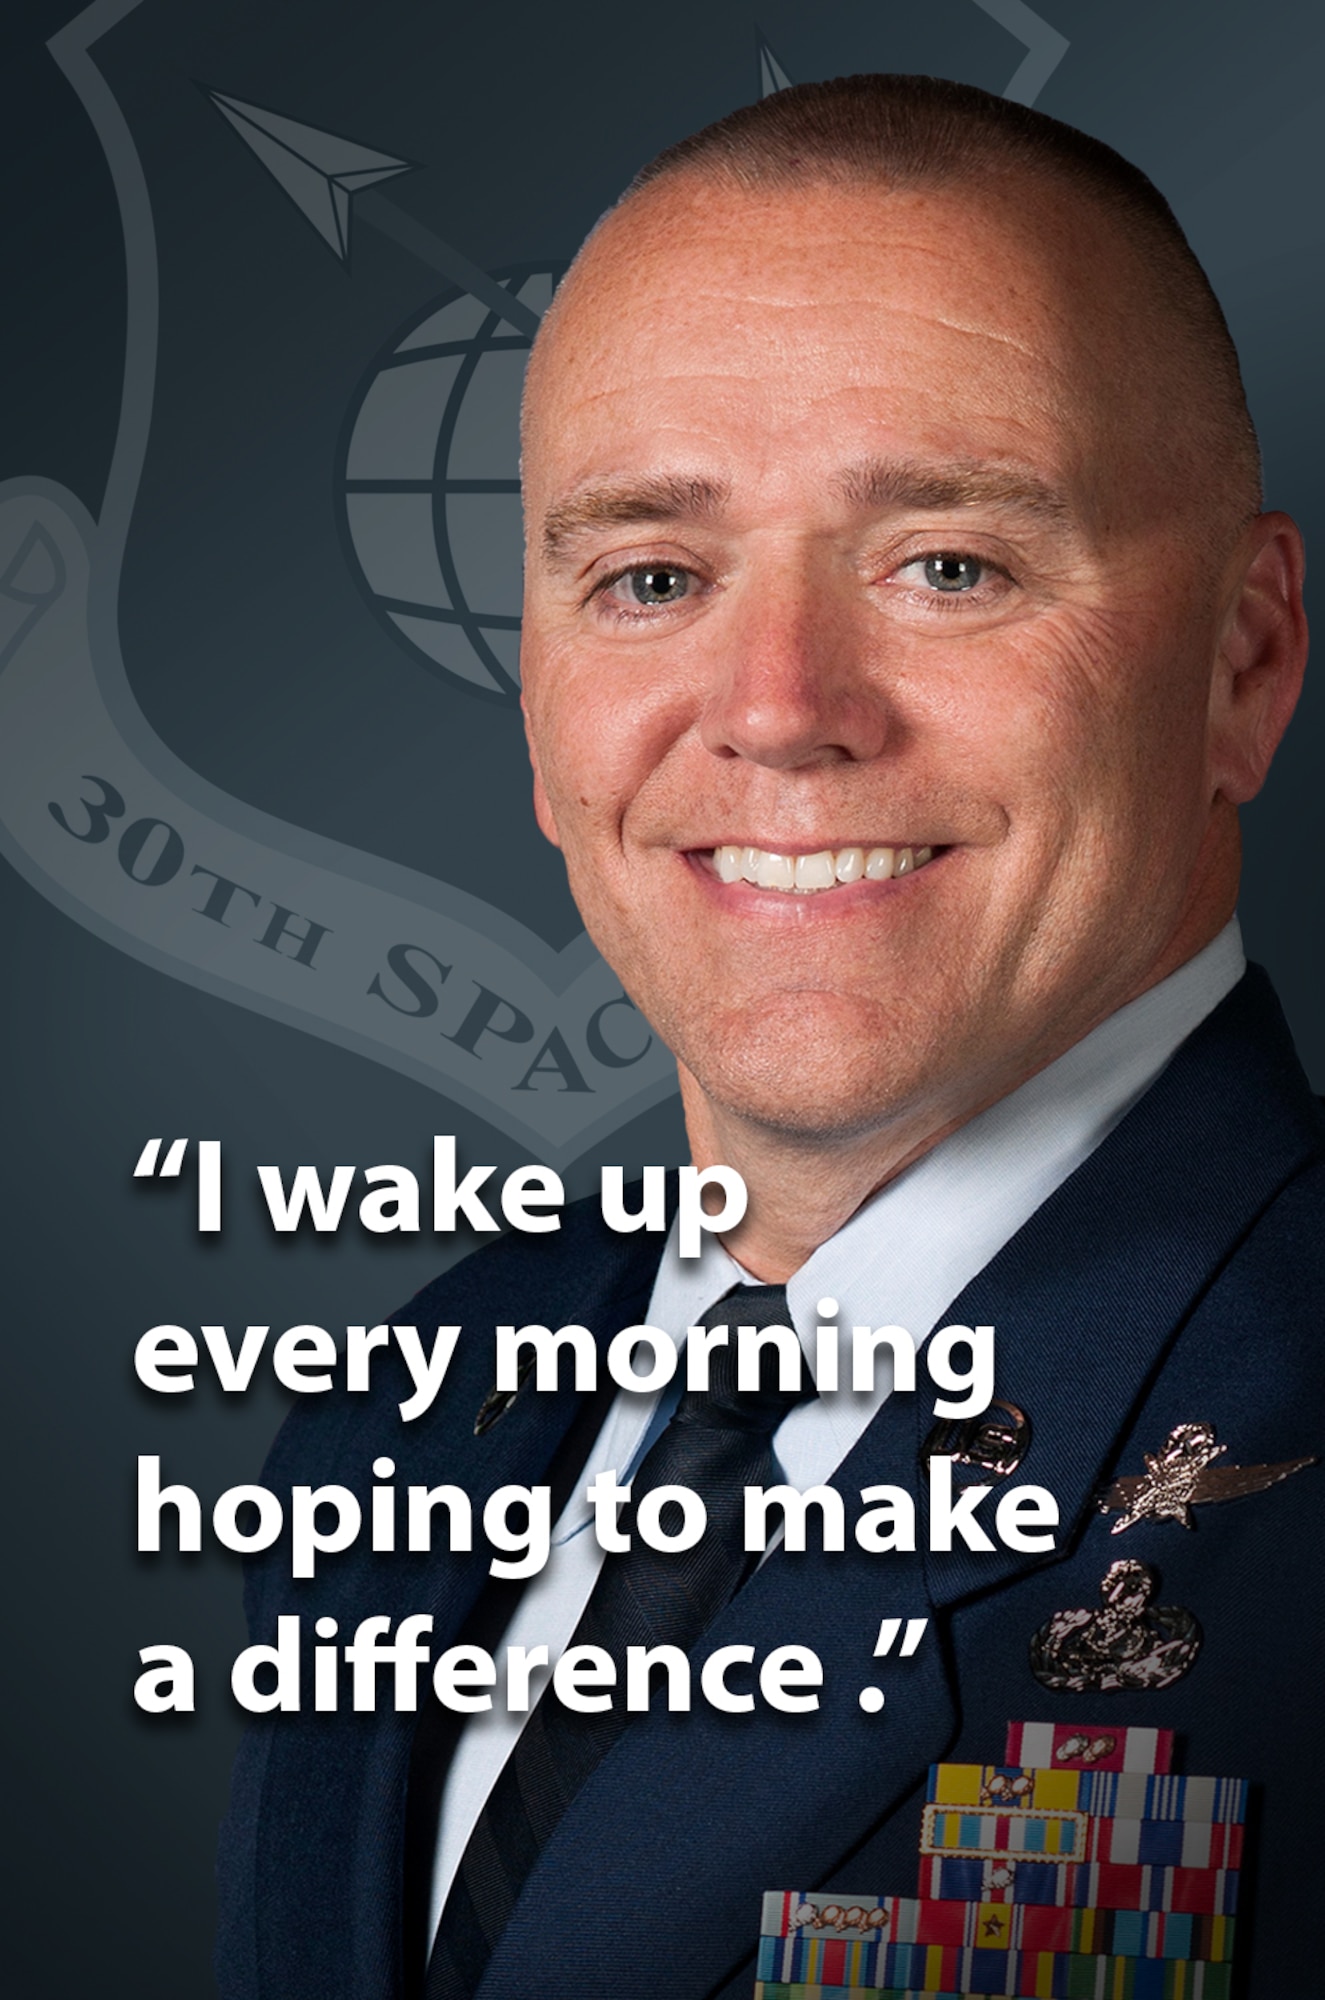 Chief Master Sgt. William “DJ” Jones, 30th Space Wing command chief, is responsible for thousands of Vandenberg members, a challenge he accepts with open arms. Jones’ inviting leadership style is matched by his enthusiastic personality, as well as his love for the Air Force. (U.S. Air Force graphic by Jan Kays/Released)